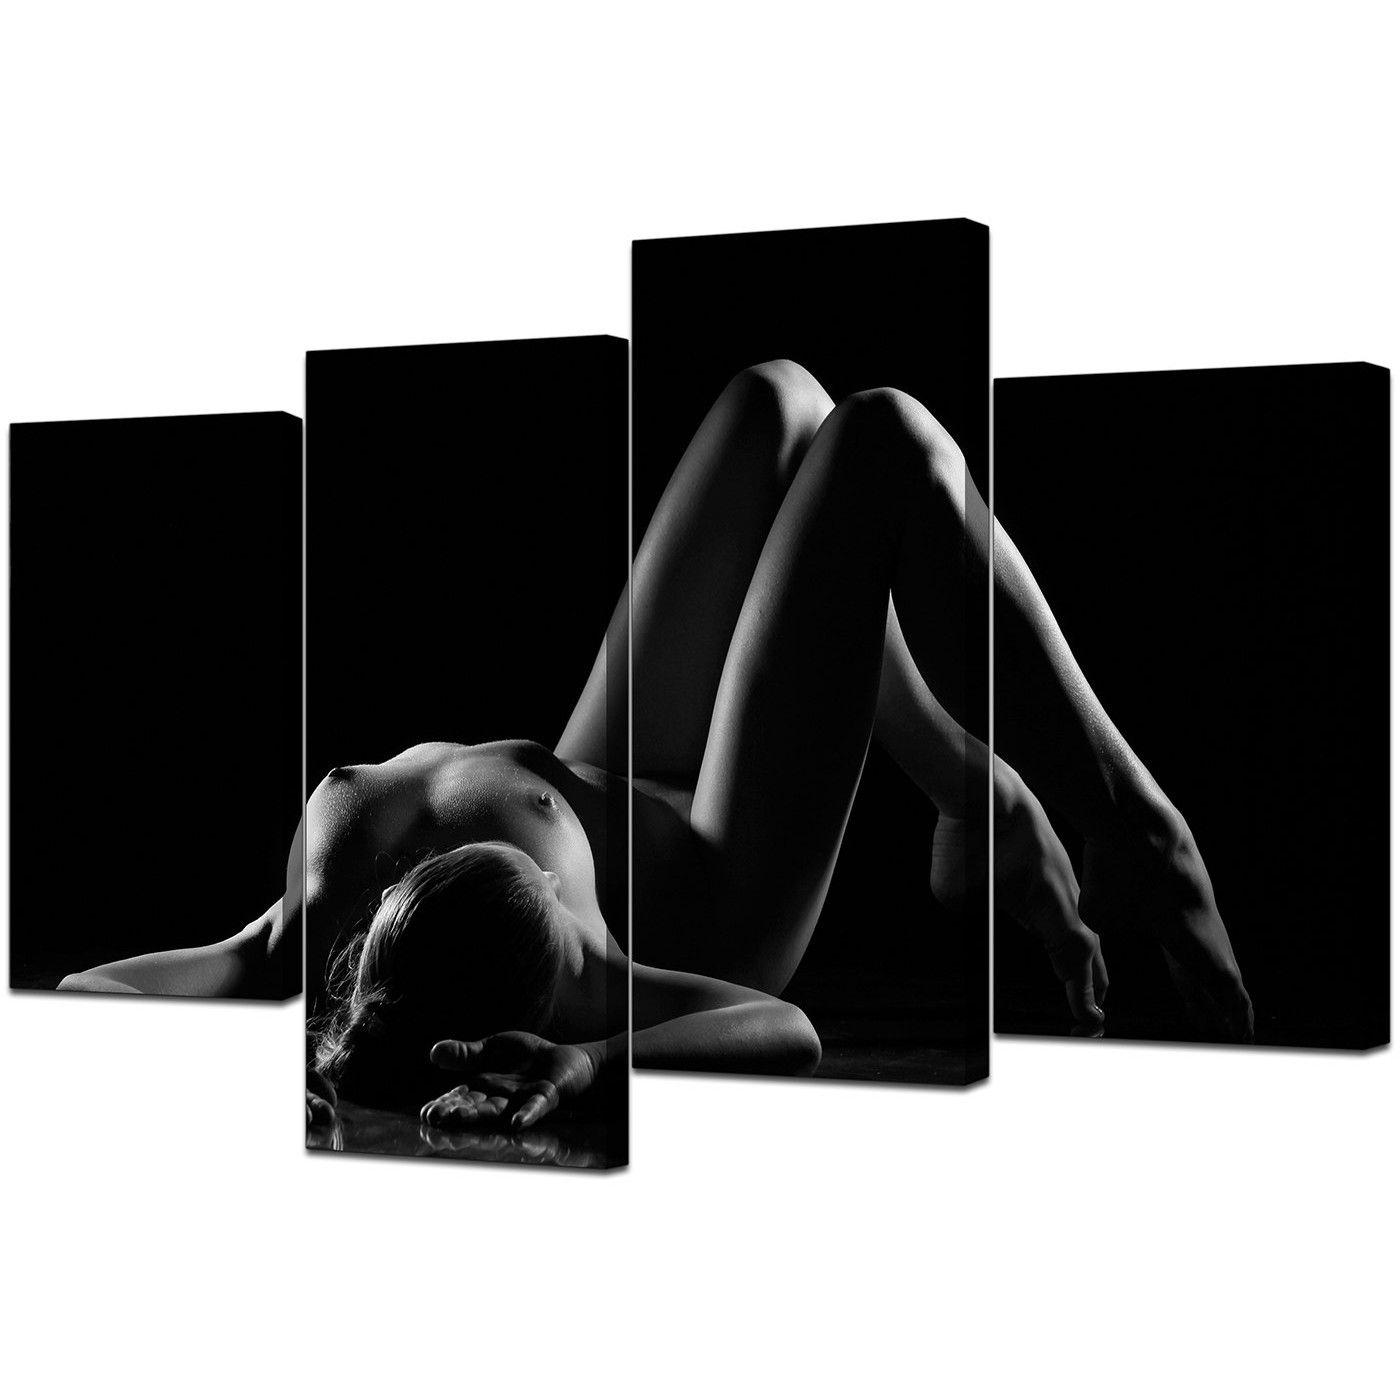 Erotic Canvas Art In Black Best White And Black Wall Art In Well Known Black And White Large Canvas Wall Art (View 6 of 15)